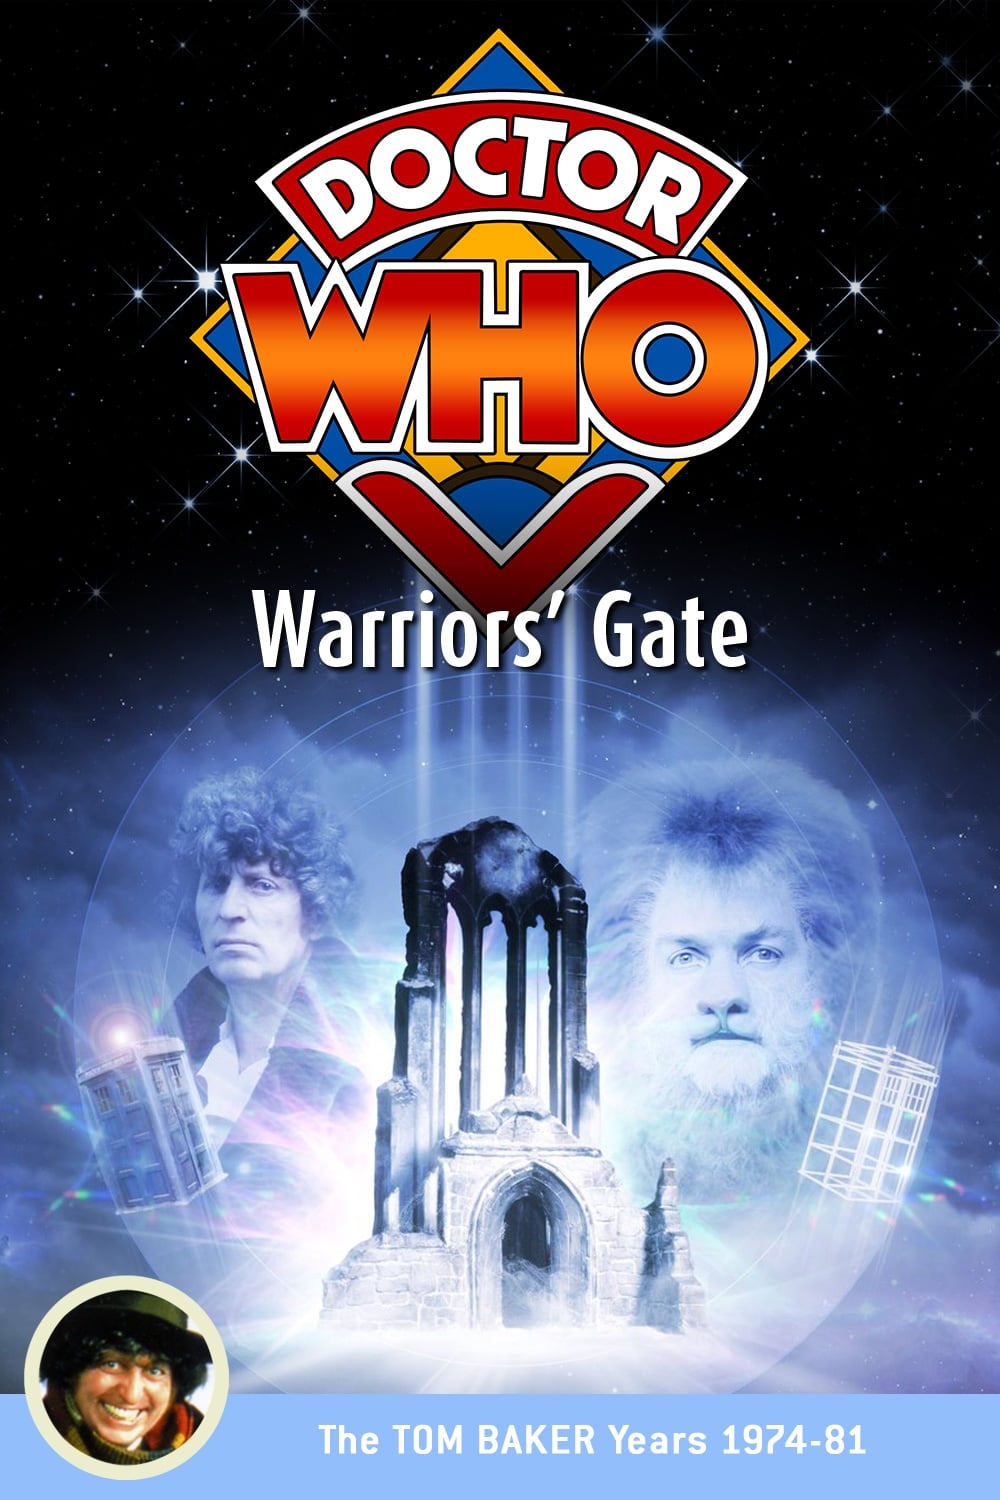 Doctor Who: Warriors' Gate (1981)